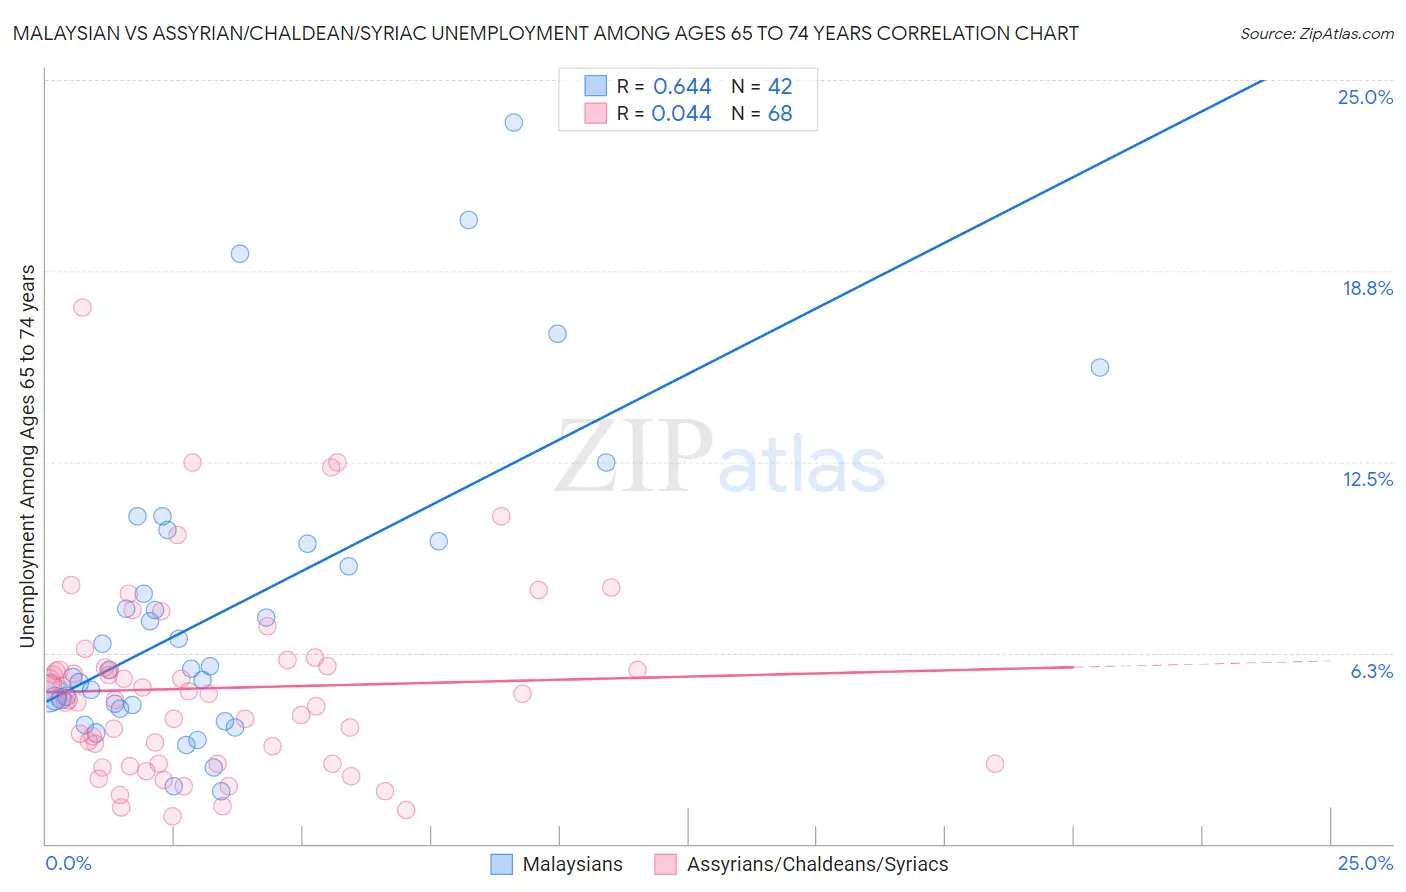 Malaysian vs Assyrian/Chaldean/Syriac Unemployment Among Ages 65 to 74 years